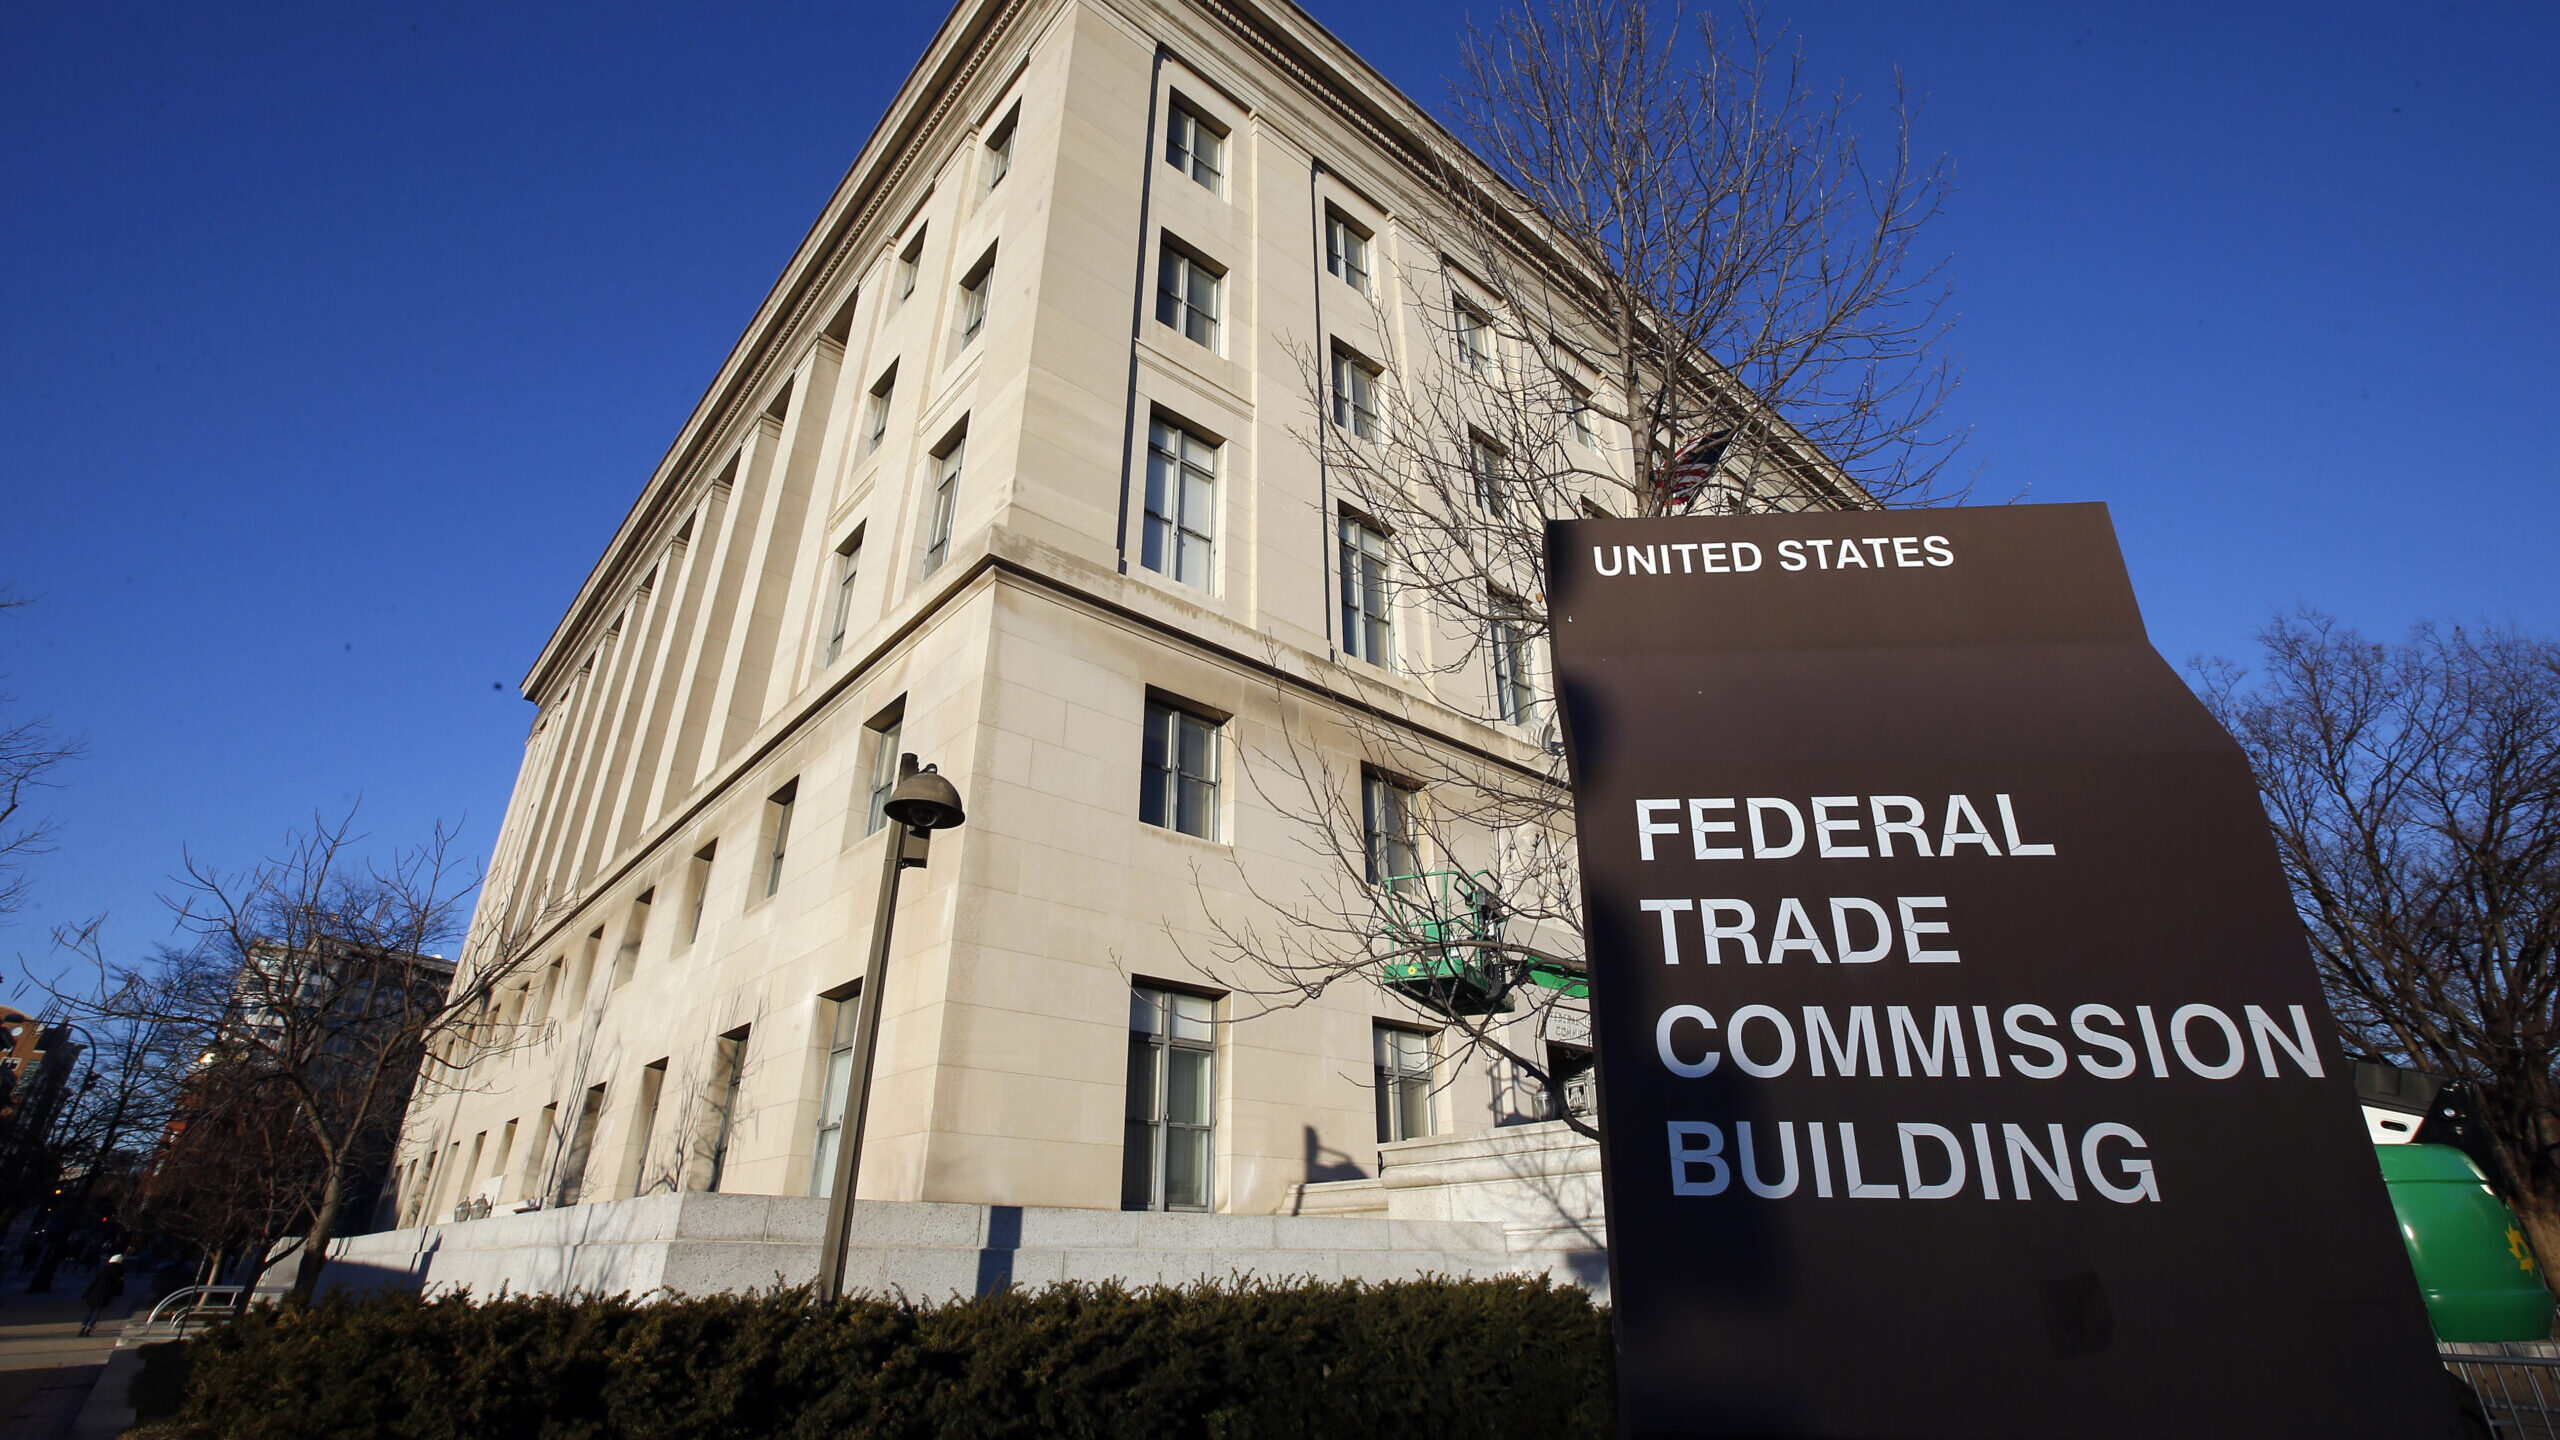 ftc building shown, a new rule would bar noncompete agreements for most...